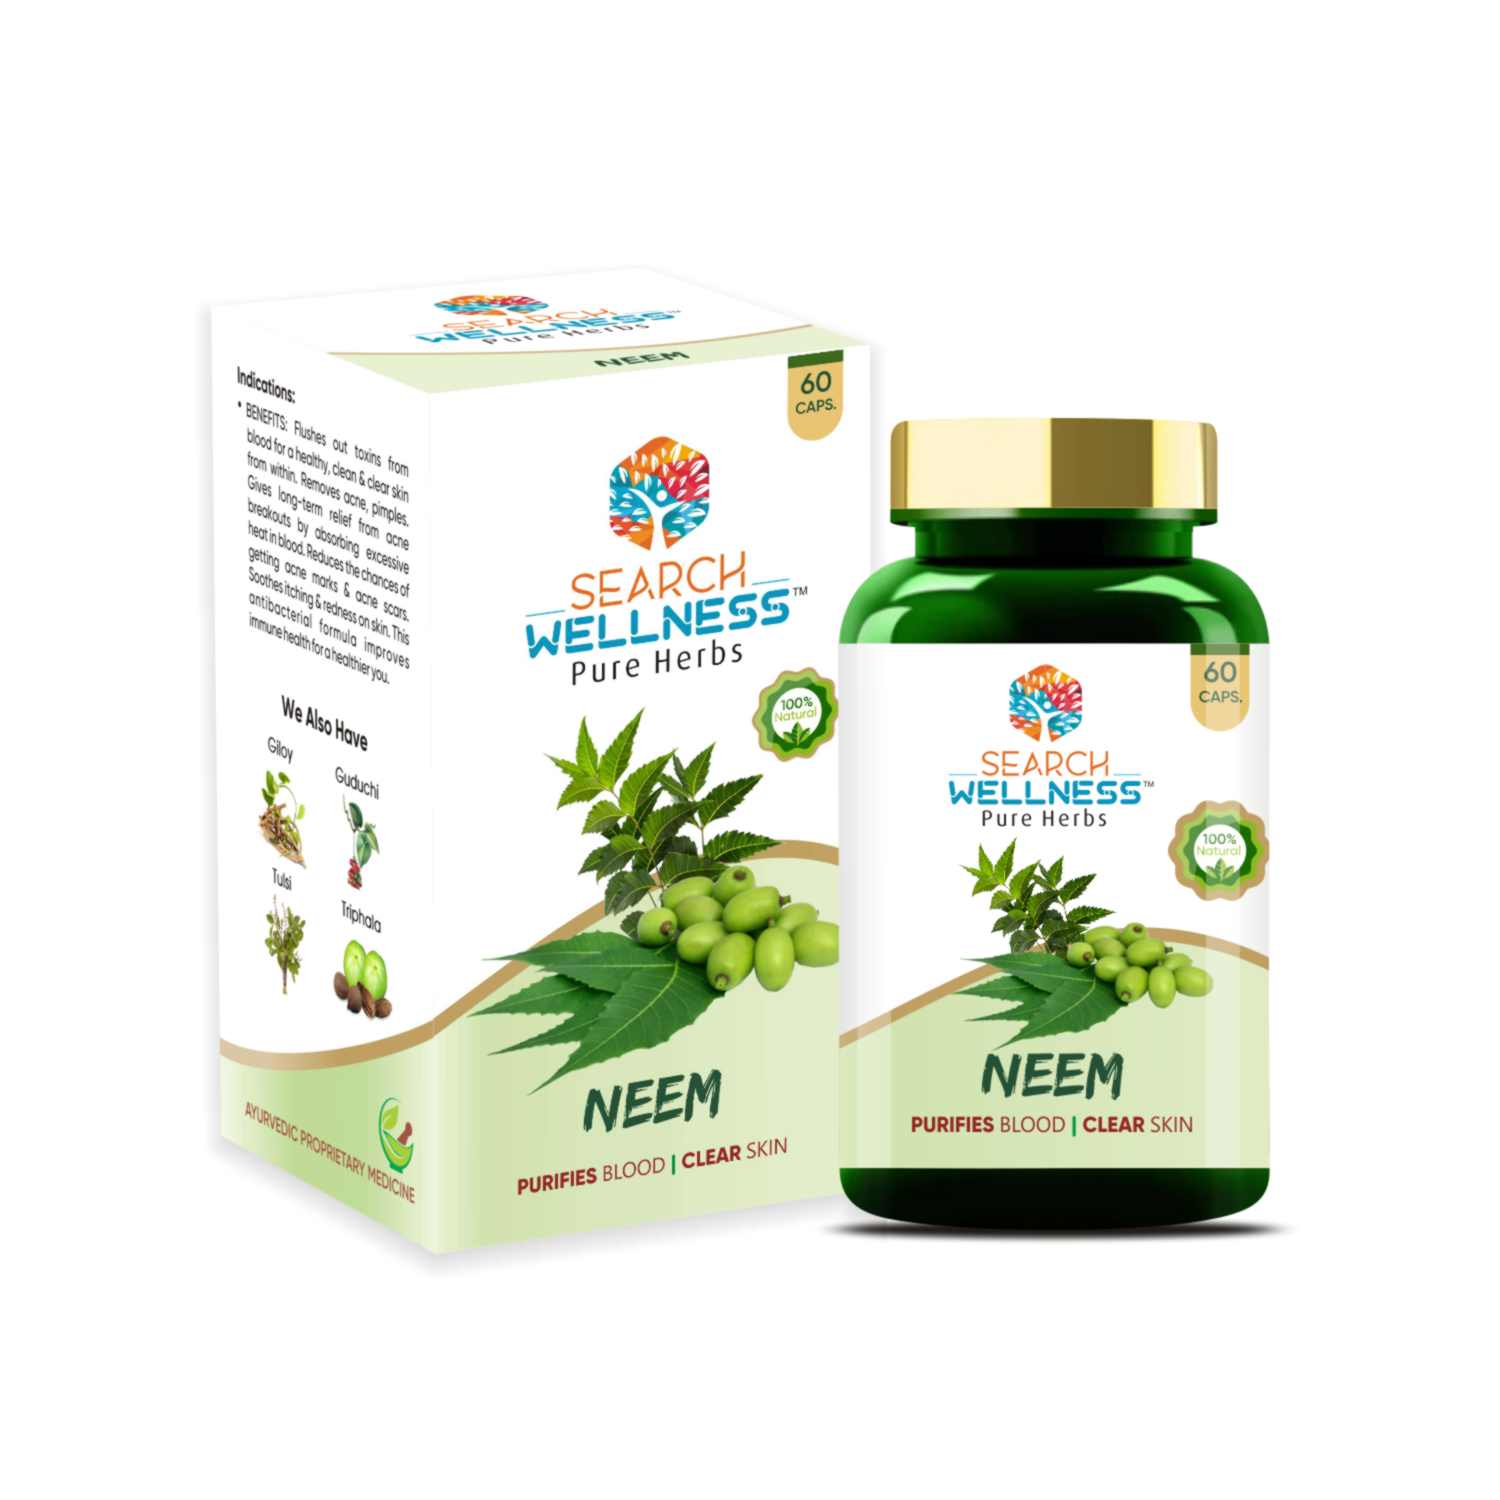 Neem - Purifies Blood, Clear Skin & Prevents Acne | High Absorption,Detoxification & Pimple Care Supplement - 60 Capsules